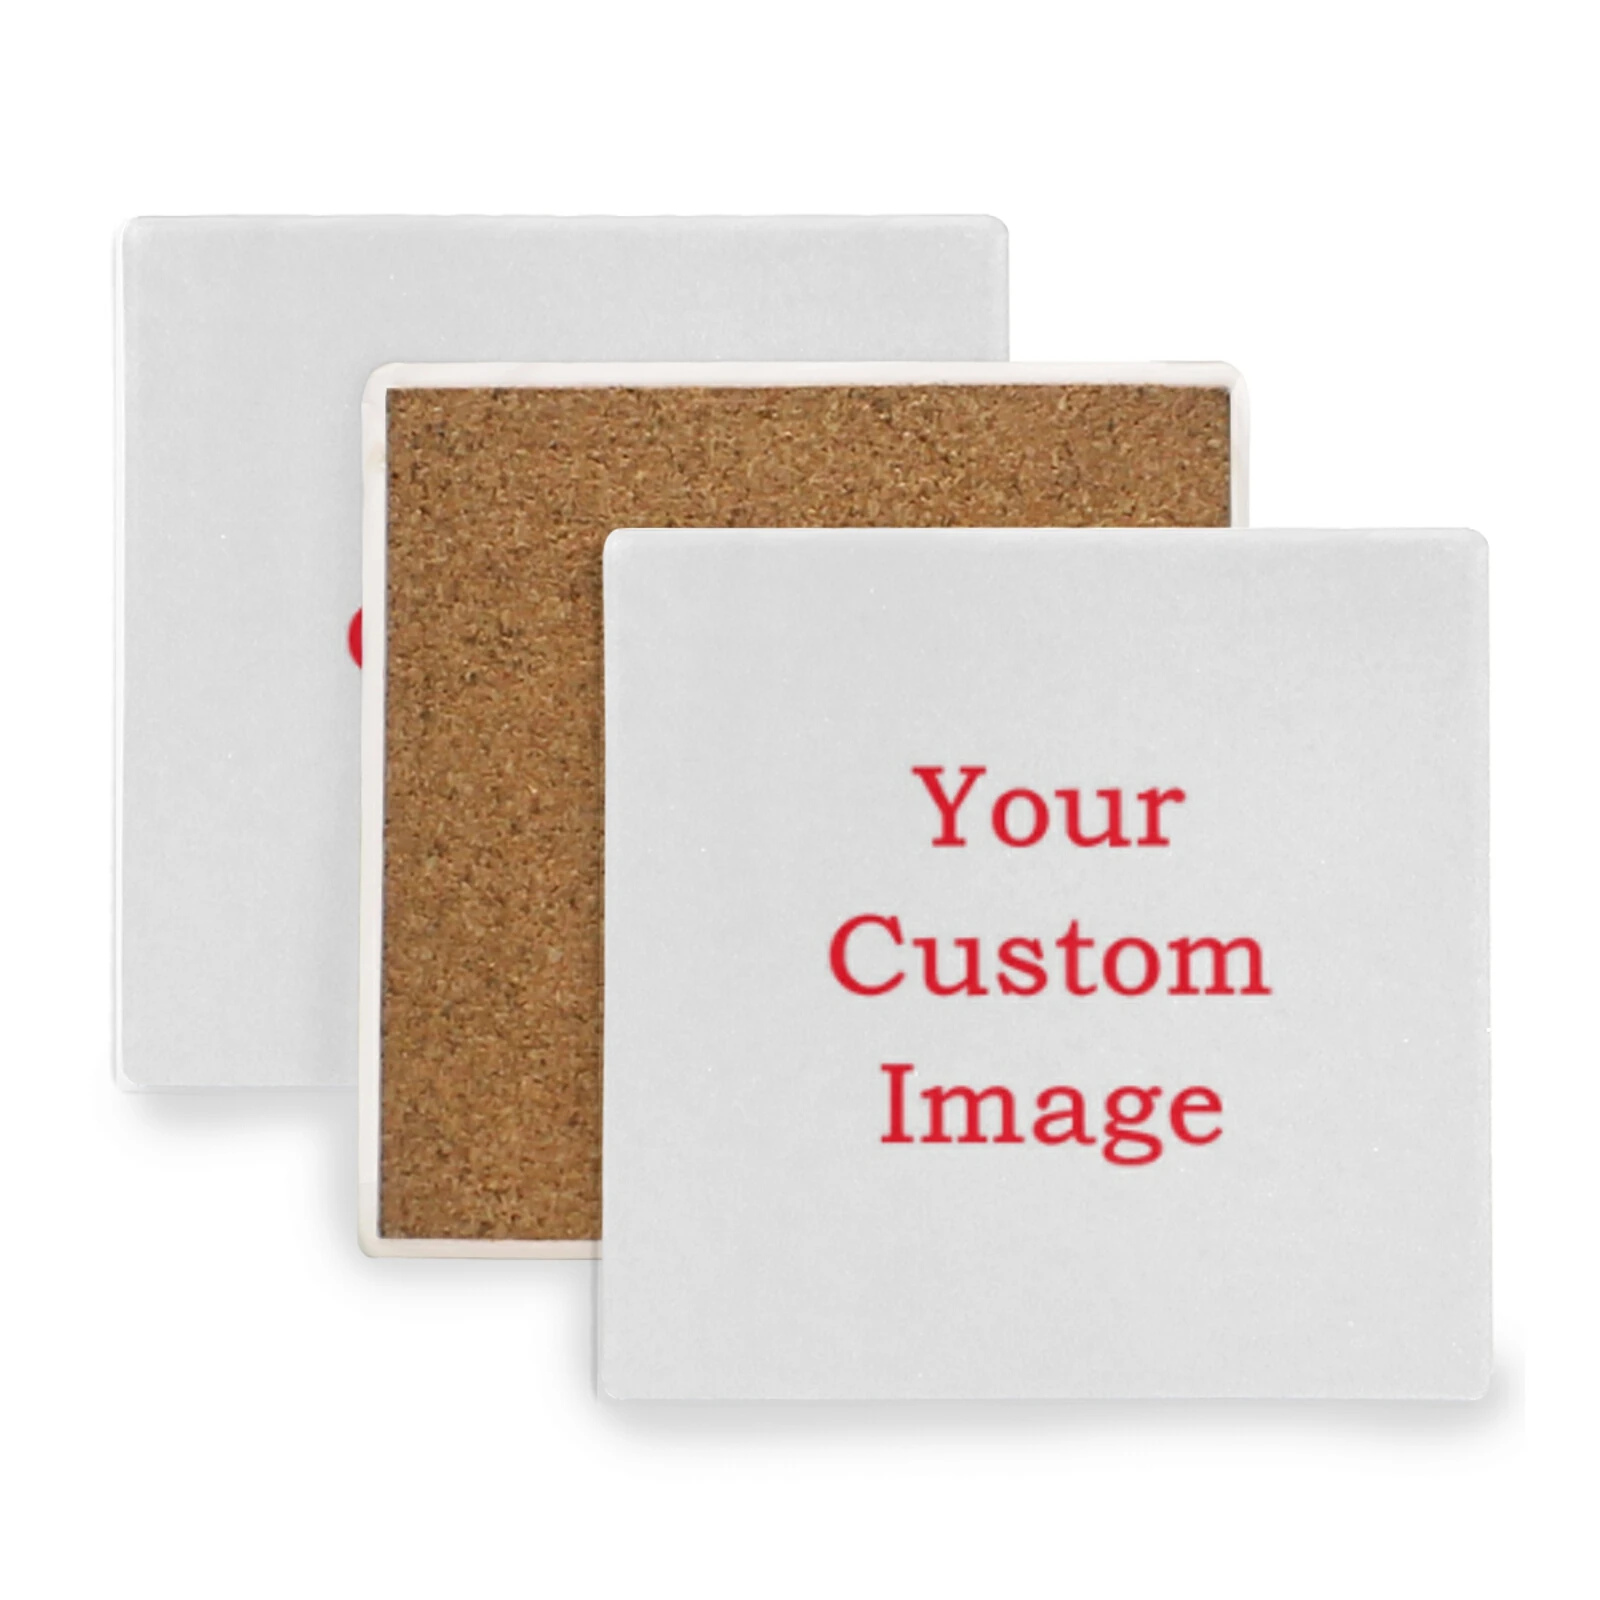 Custom Square Coasters Ceramic Stone With Cork Backing Prevent Furniture From Dirty Scratched Coasters Set of 4 For All Cups